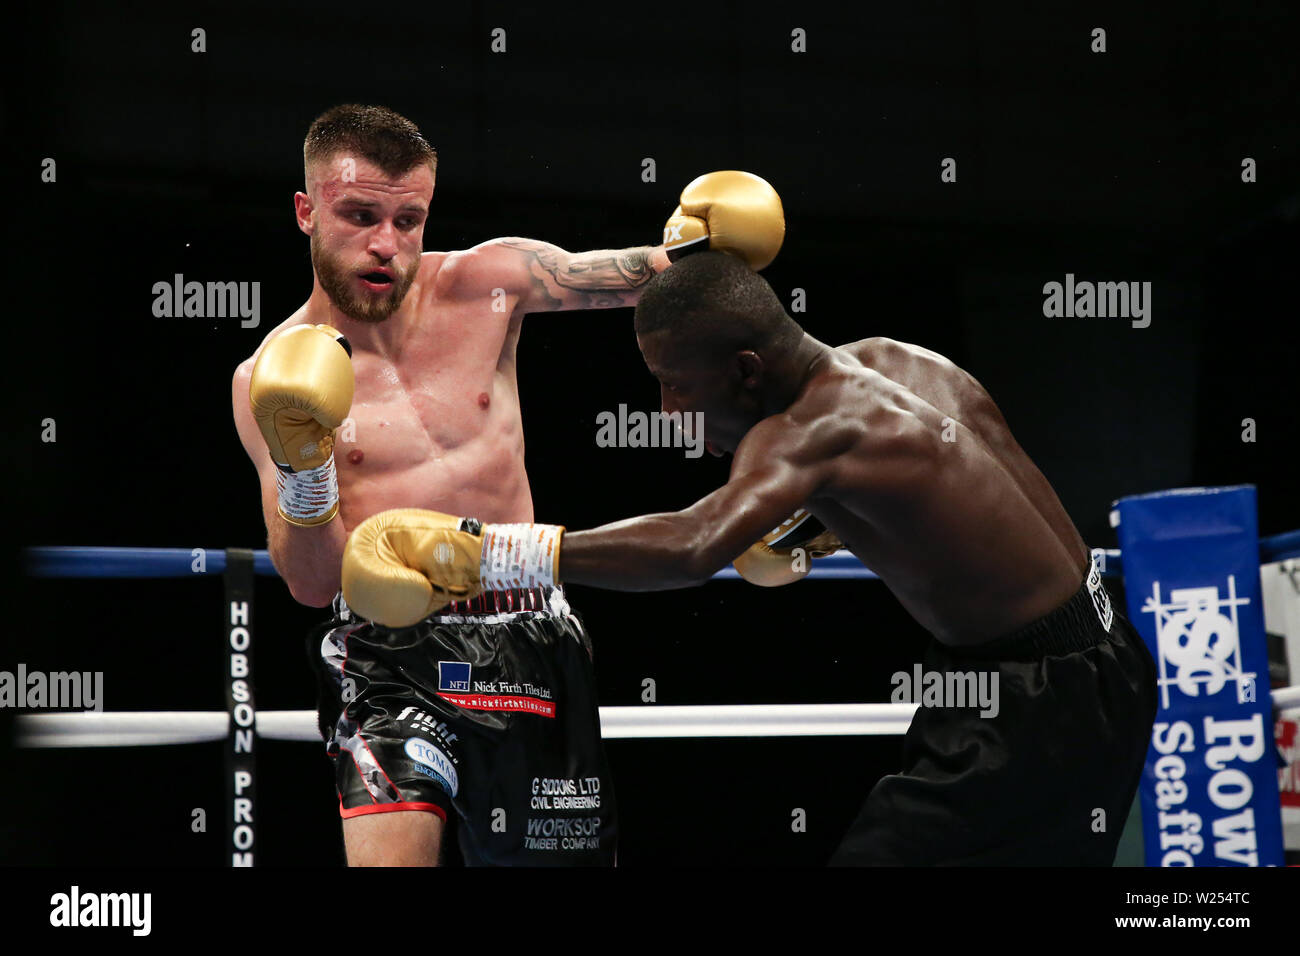 Tommy Frank lands a left hook on John Chuwa during the Dennis Hobson Promotions boxing event at Ponds Forge, Sheffield. Picture date: 5th July 2019. P Stock Photo